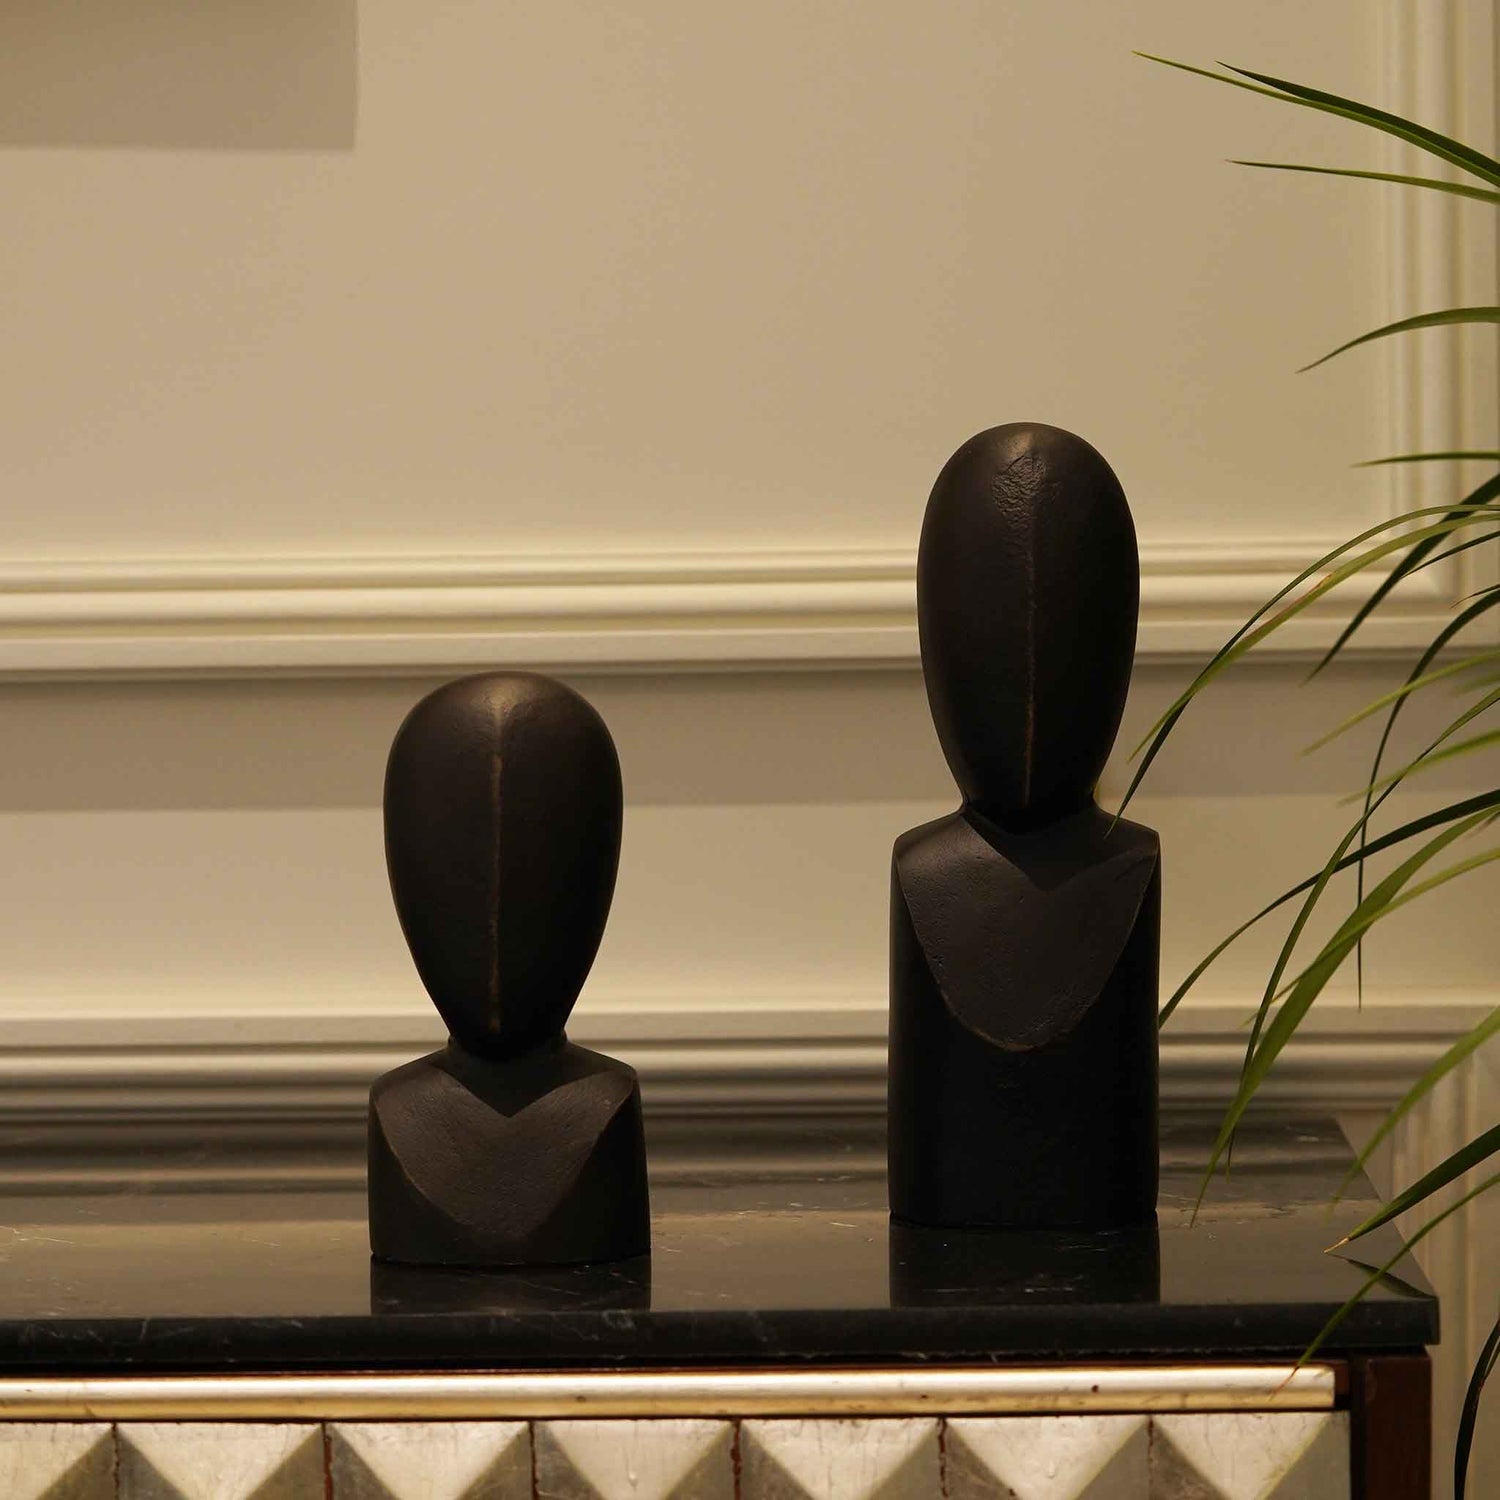 Pair of two black colored abstract faces as table-top decor.